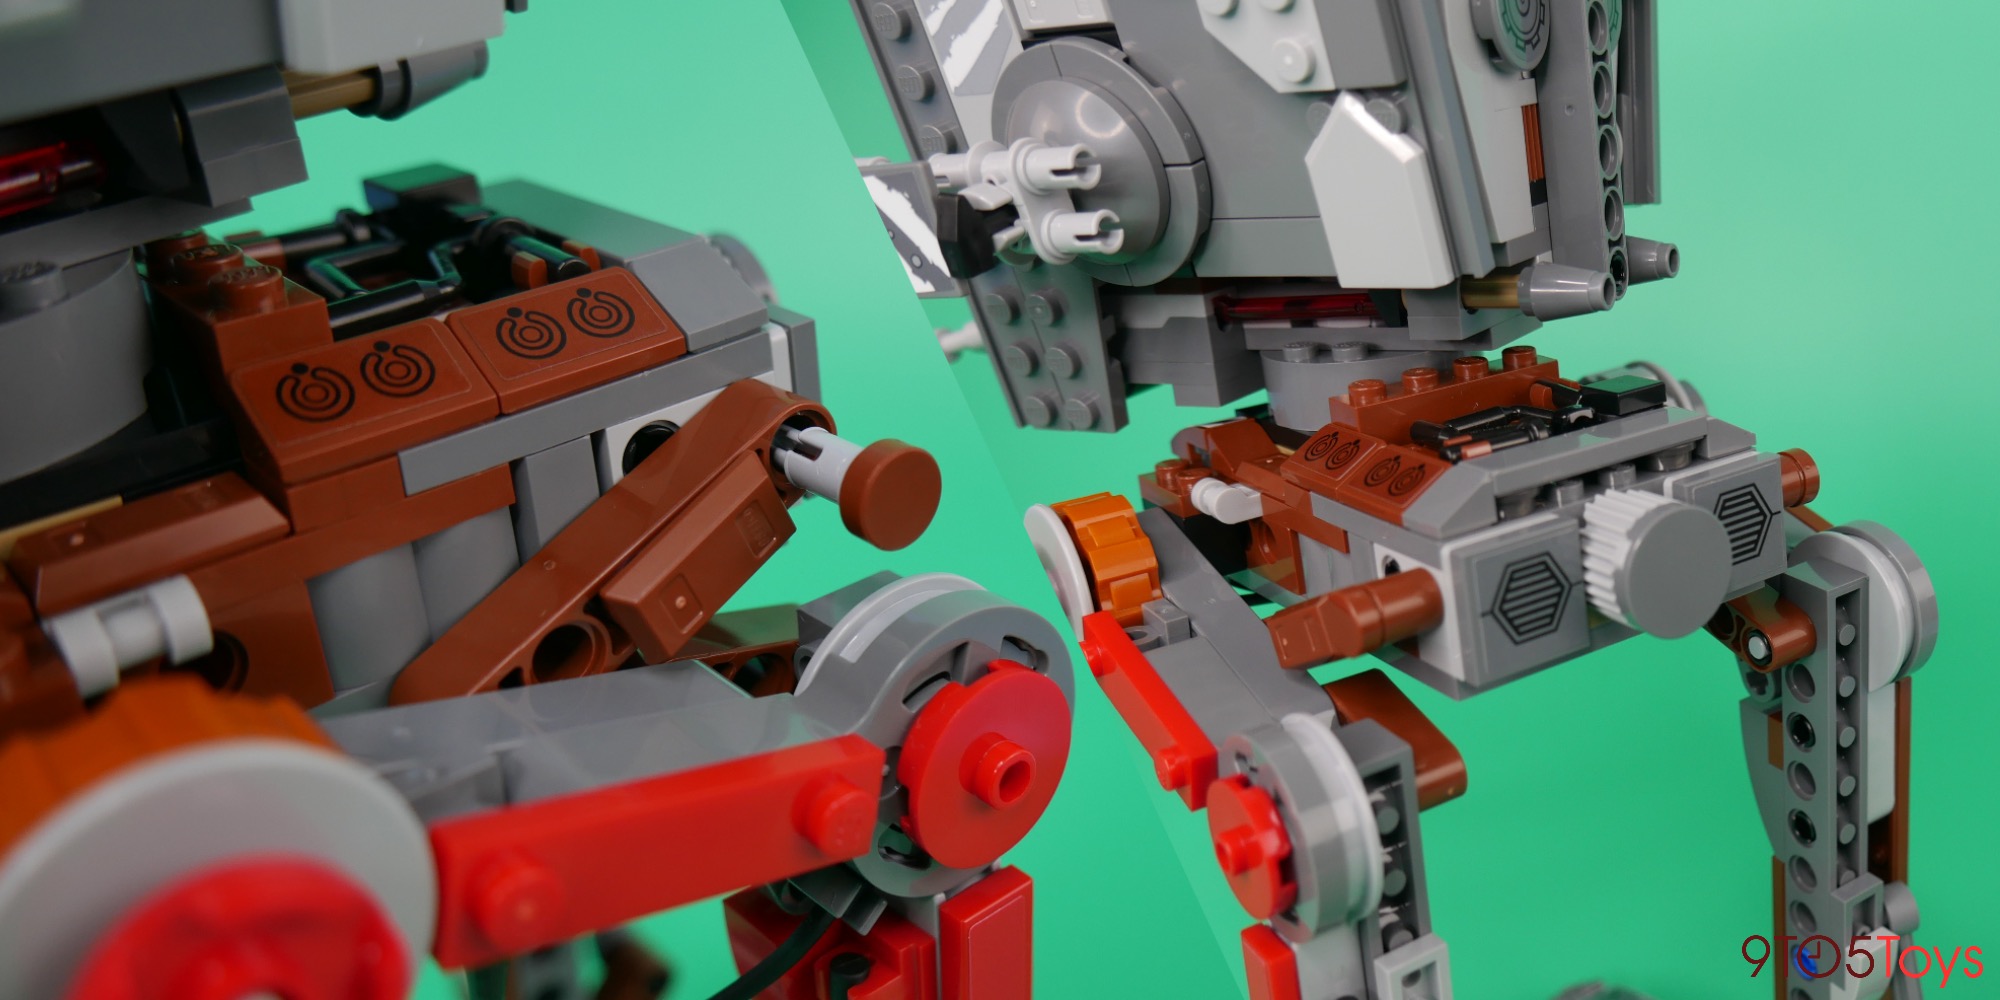 LEGO AT-ST Review